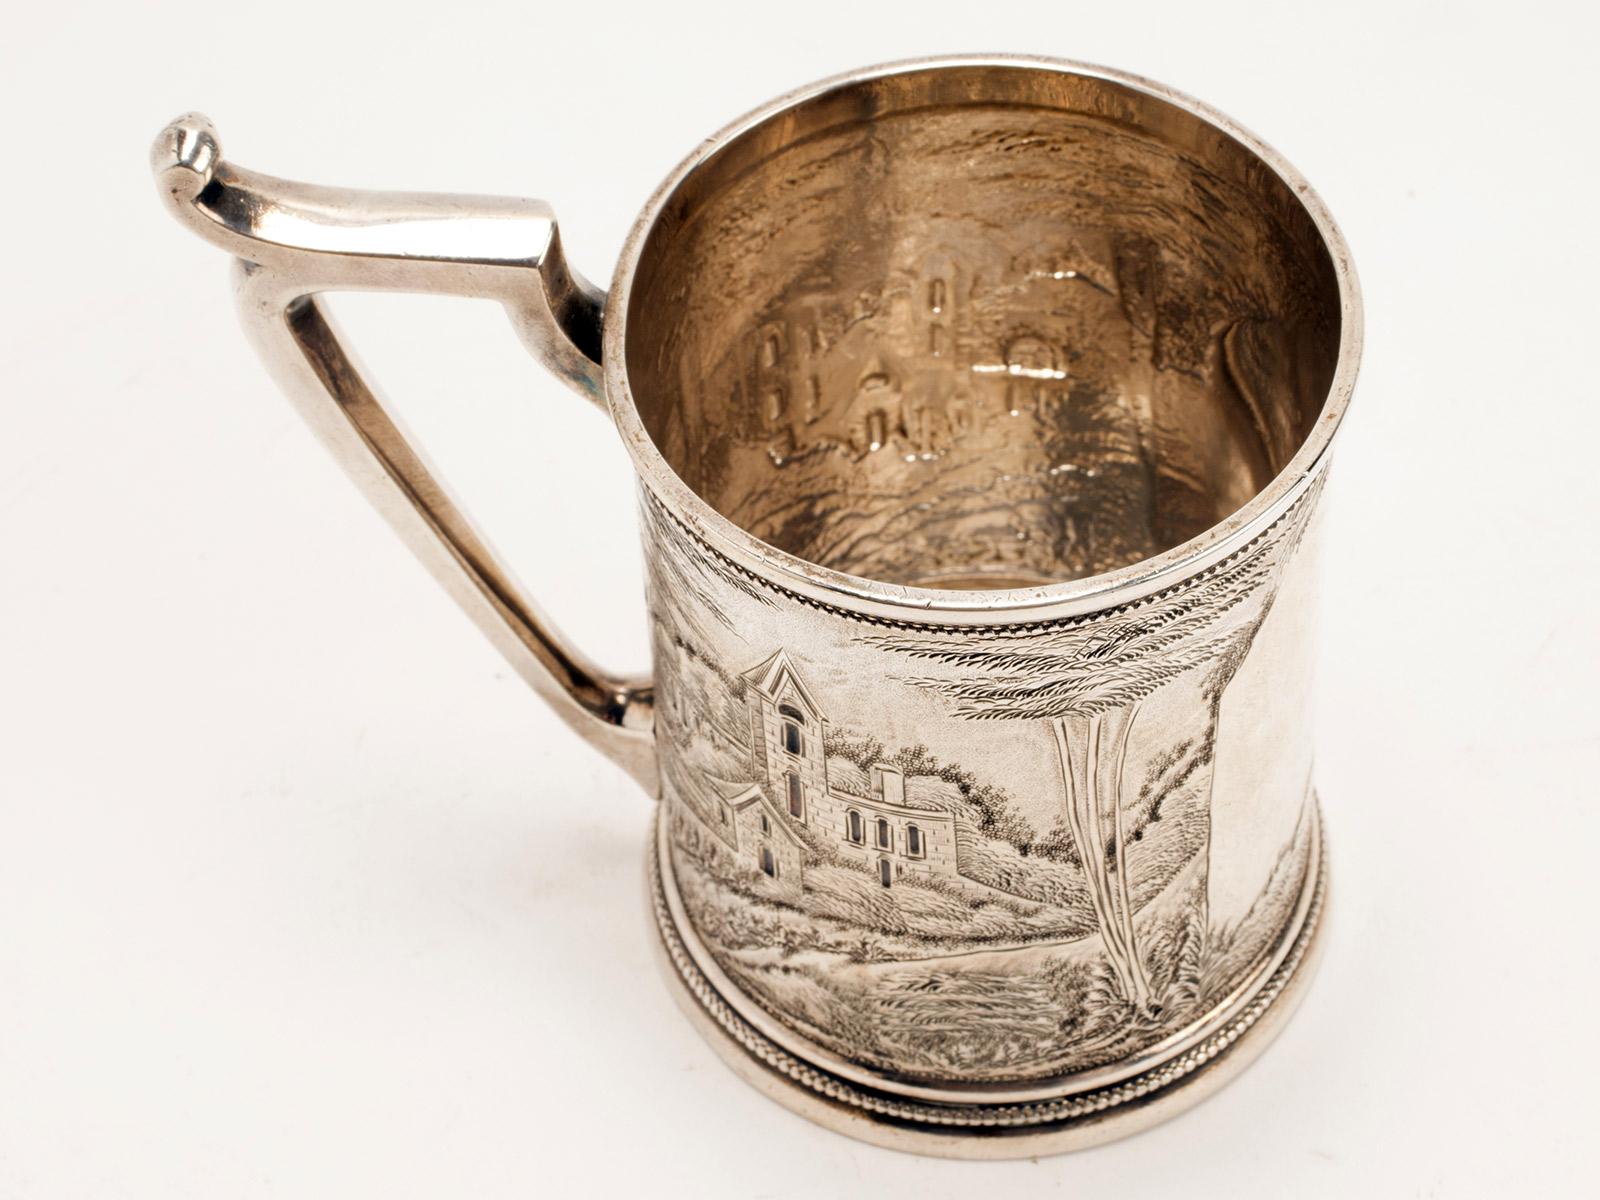 Late 19th Century Sterling Silver Mug, Embossed, Depicting Monuments and Architecture, USA, 1890